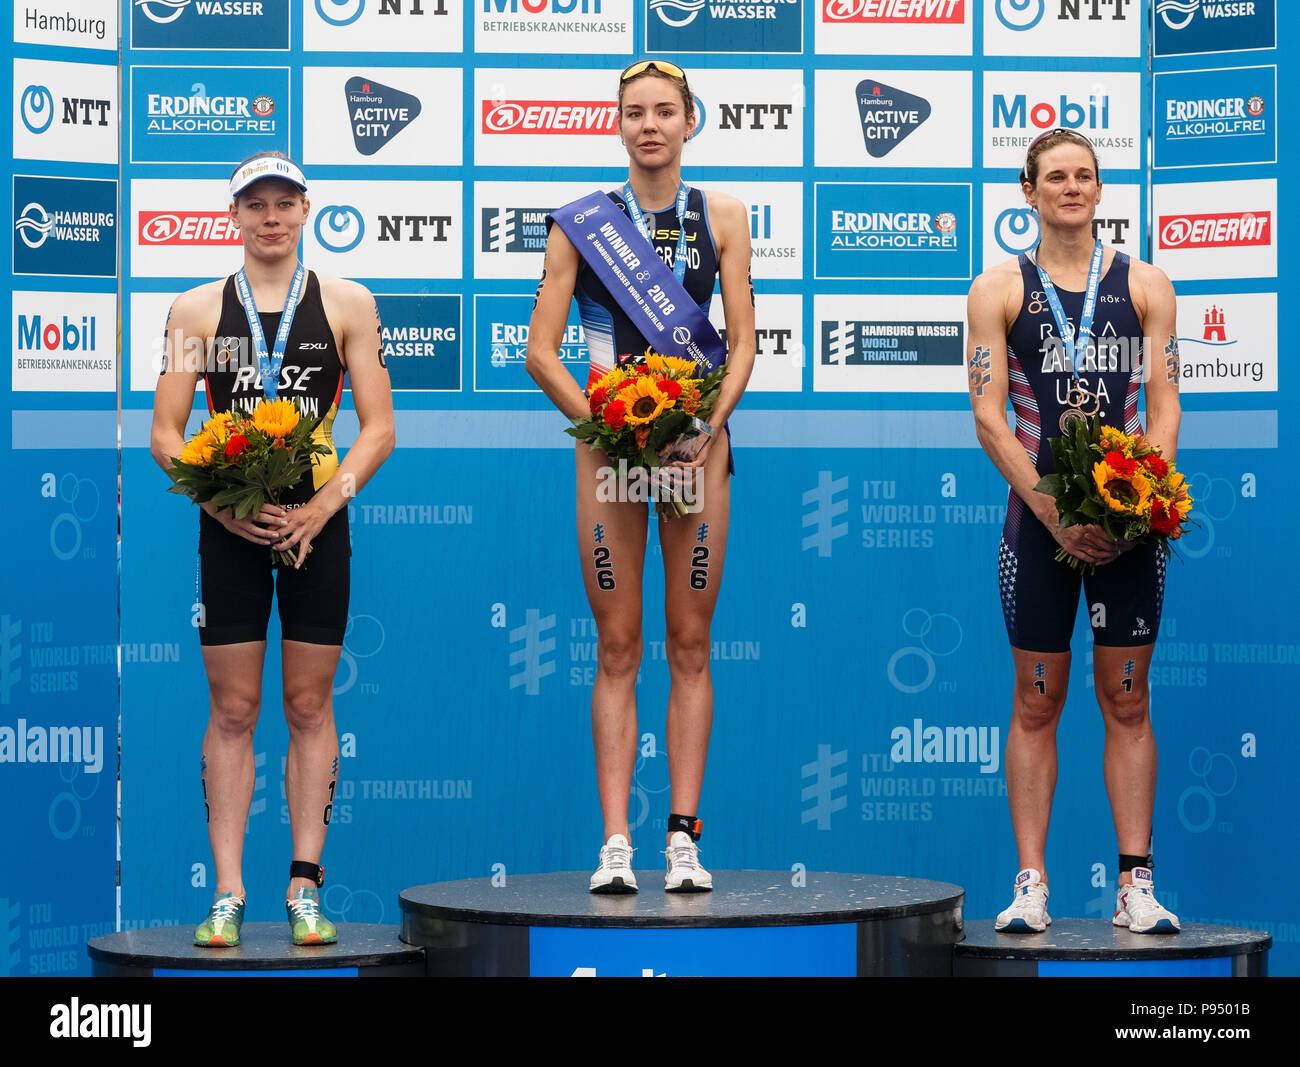 Hamburg Germany 14th July 2018 Cassandre Beaugrand Of France C Winner Of The Women S Triathlon In Hamburg Standing On The Podium With Laura Lindemann L 2nd Of Germany And Katie Zaferes R 3rd